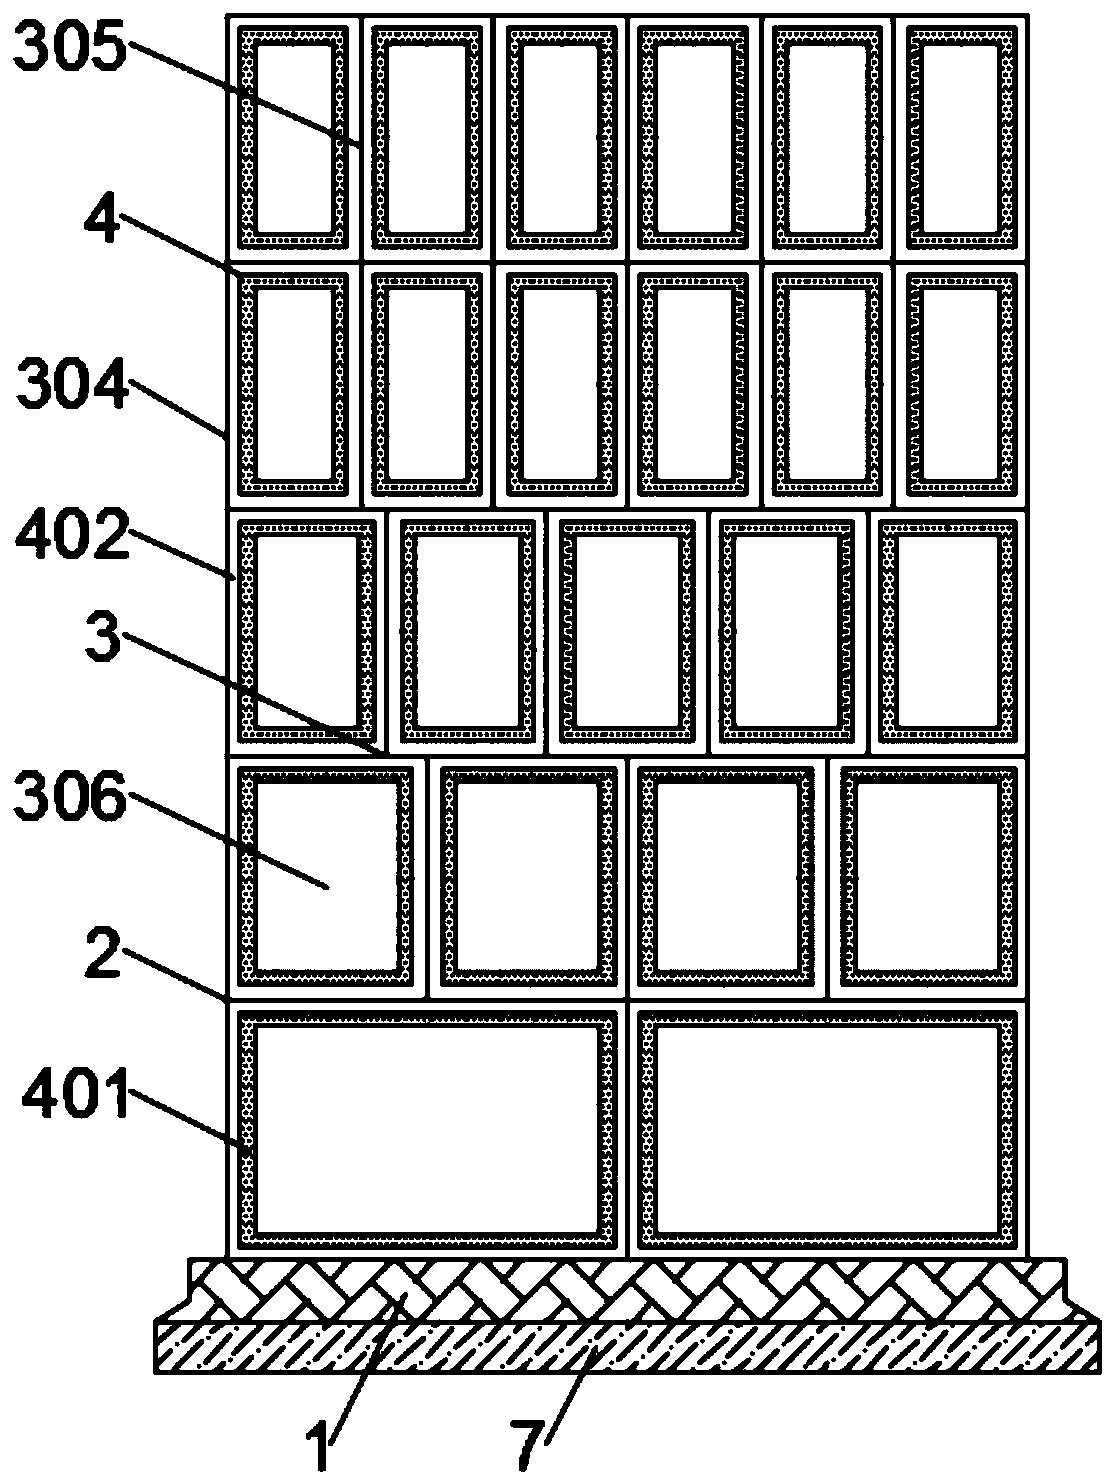 Classified warehousing frame for intelligent warehousing equipment and classified warehousing method